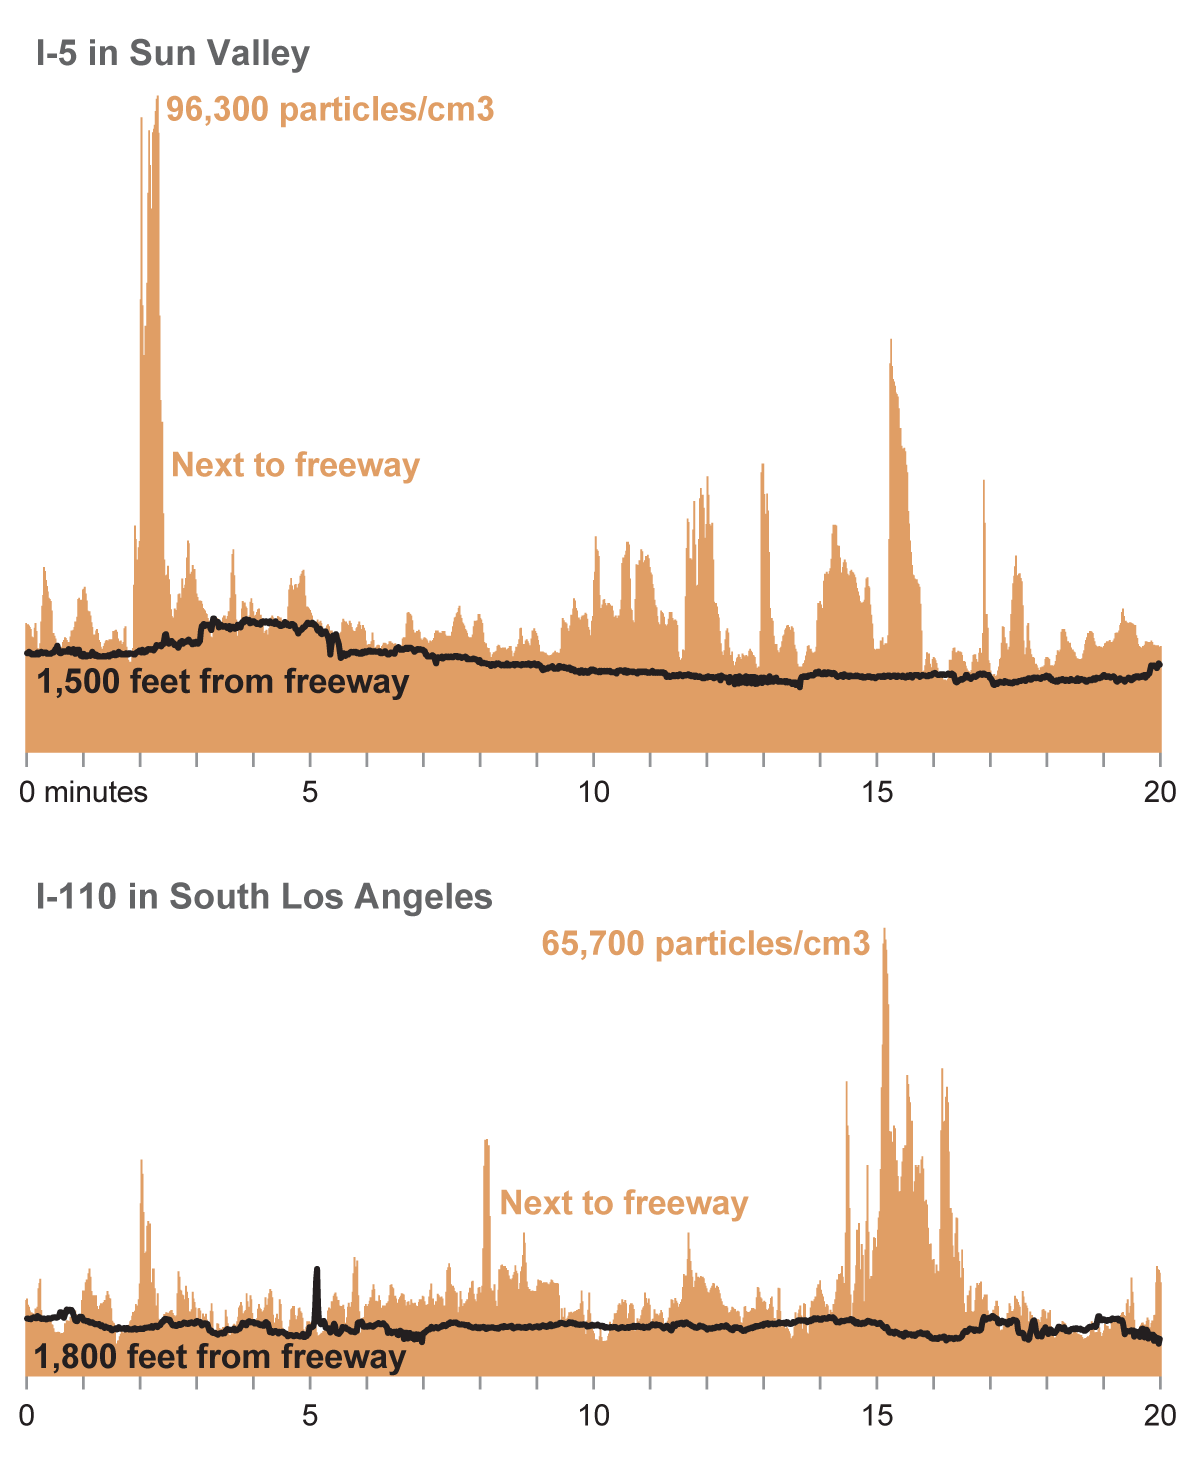 Charts showing that pollution levels are higher closer to freeways.